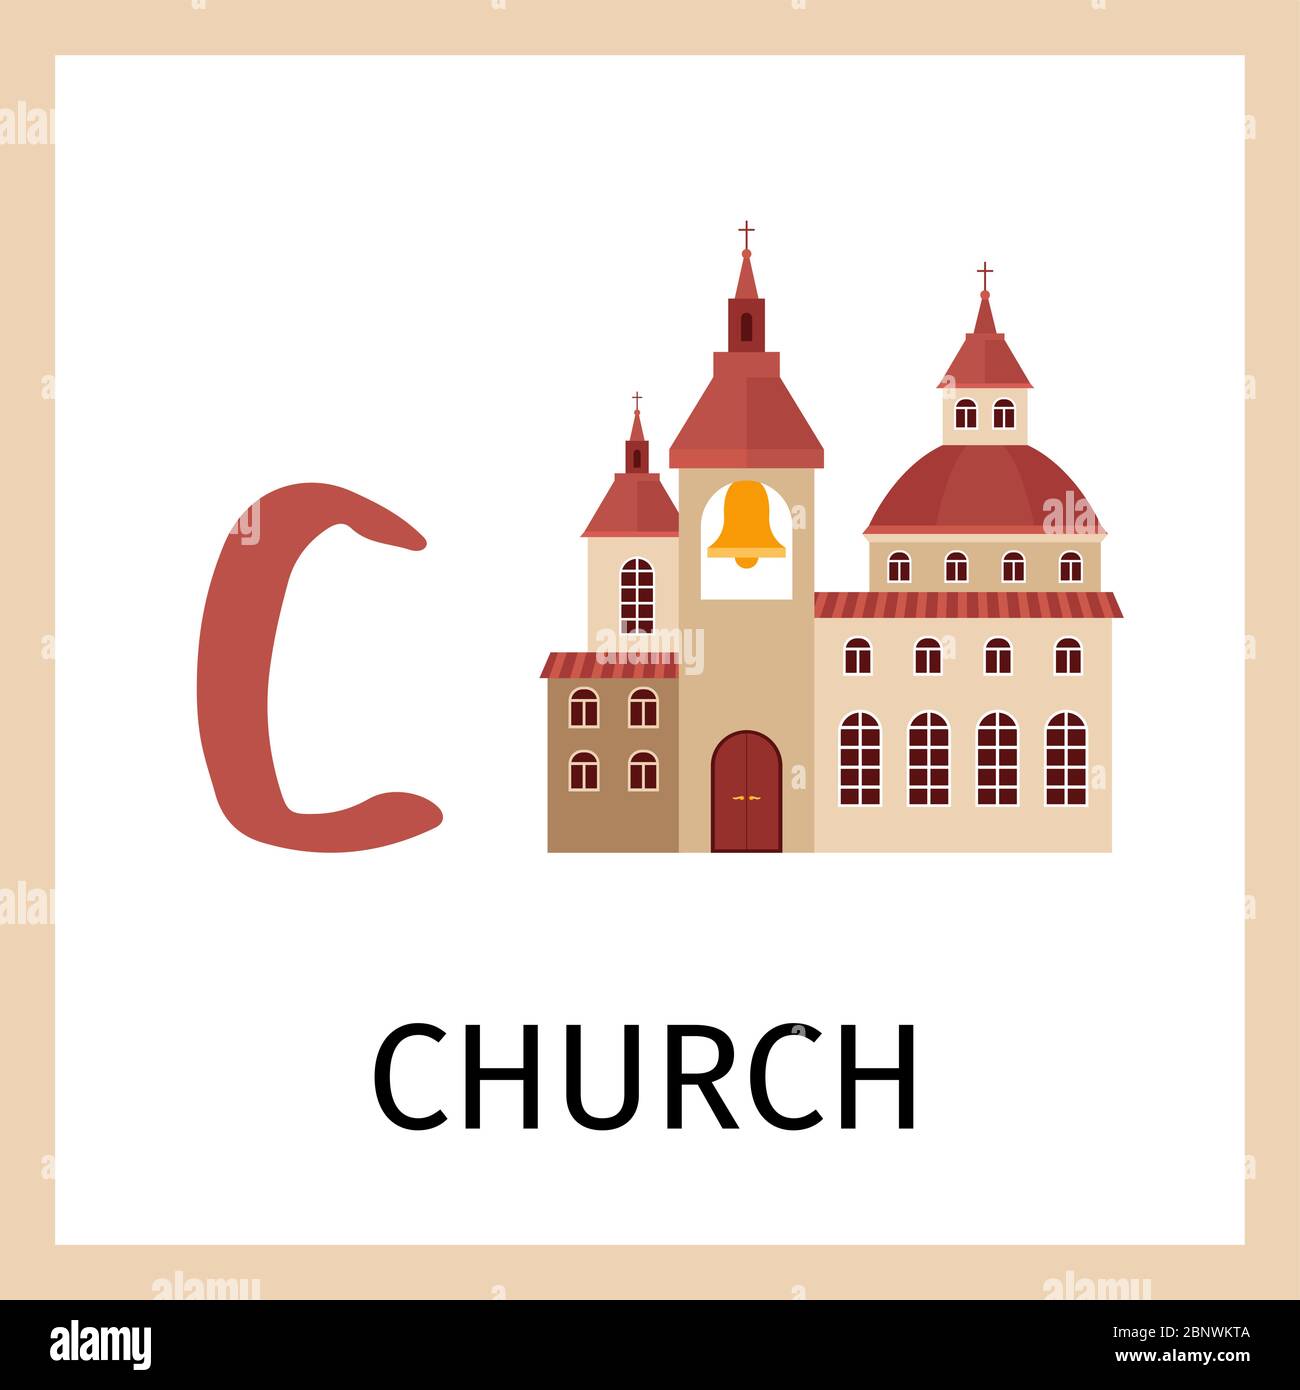 Alphabet card for kids with church building. Letter C card vector illustration Stock Vector